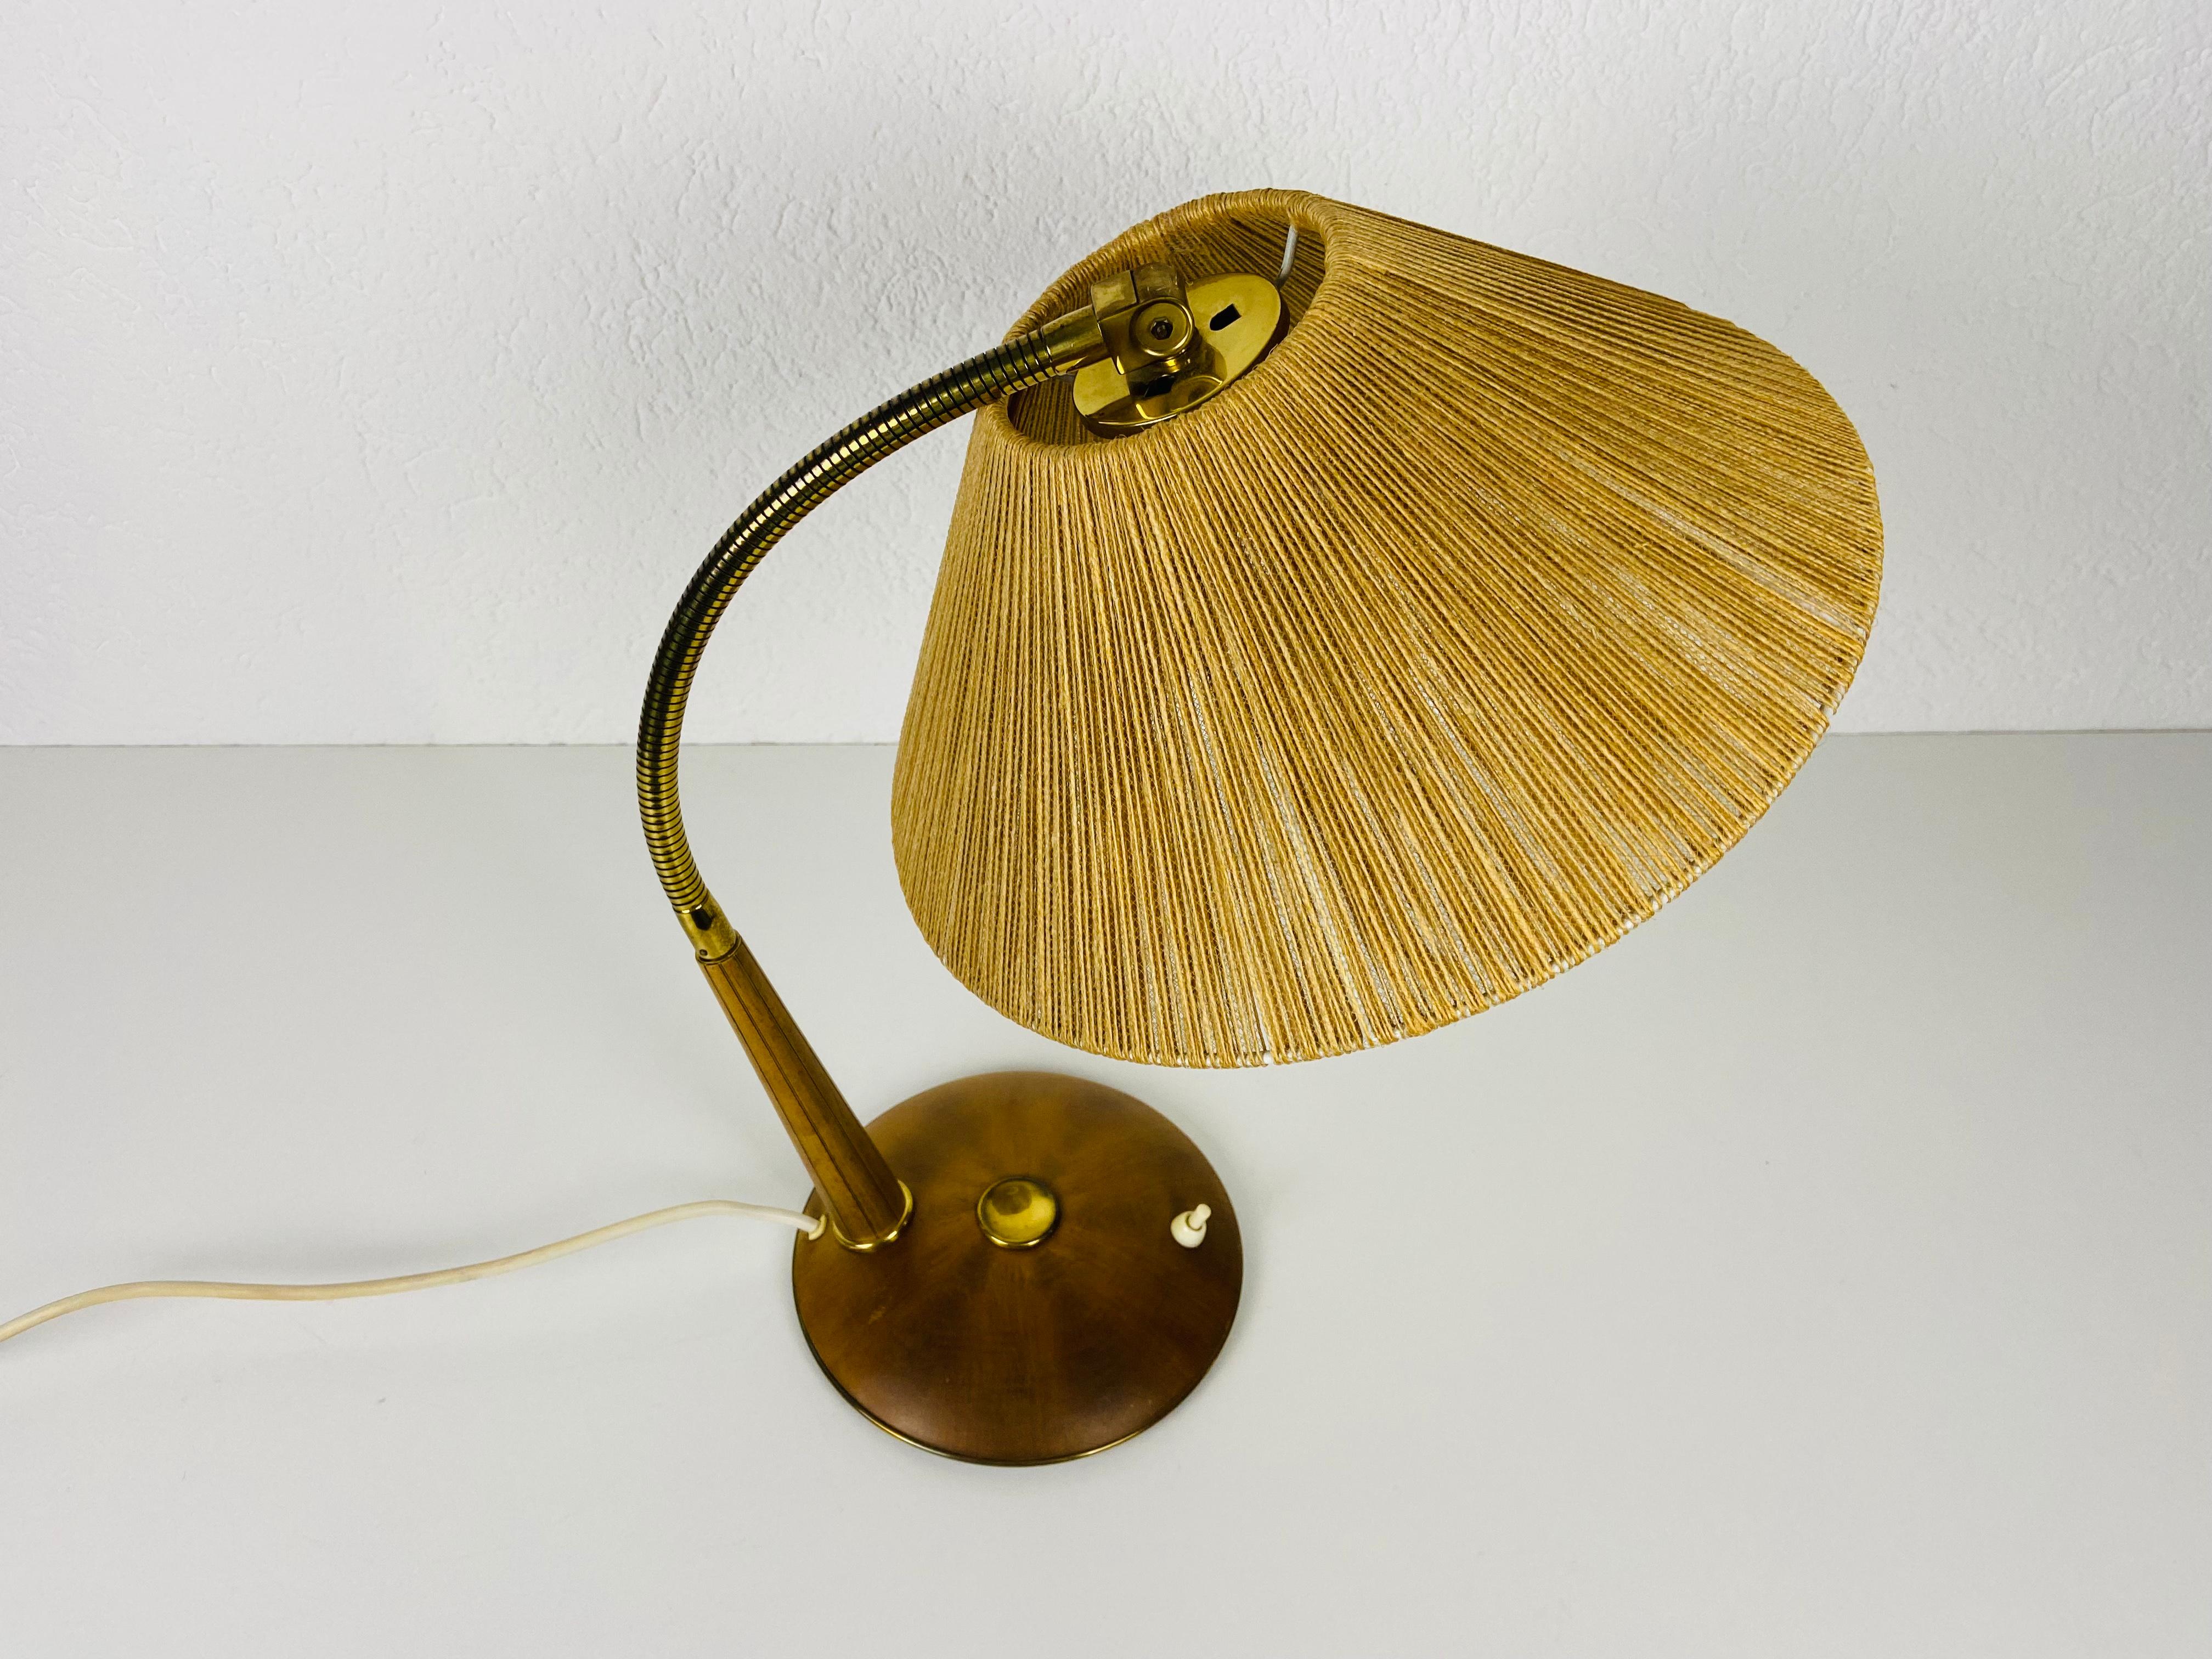 Midcentury Teak and Rattan Table Lamp by Temde, circa 1970 For Sale 8